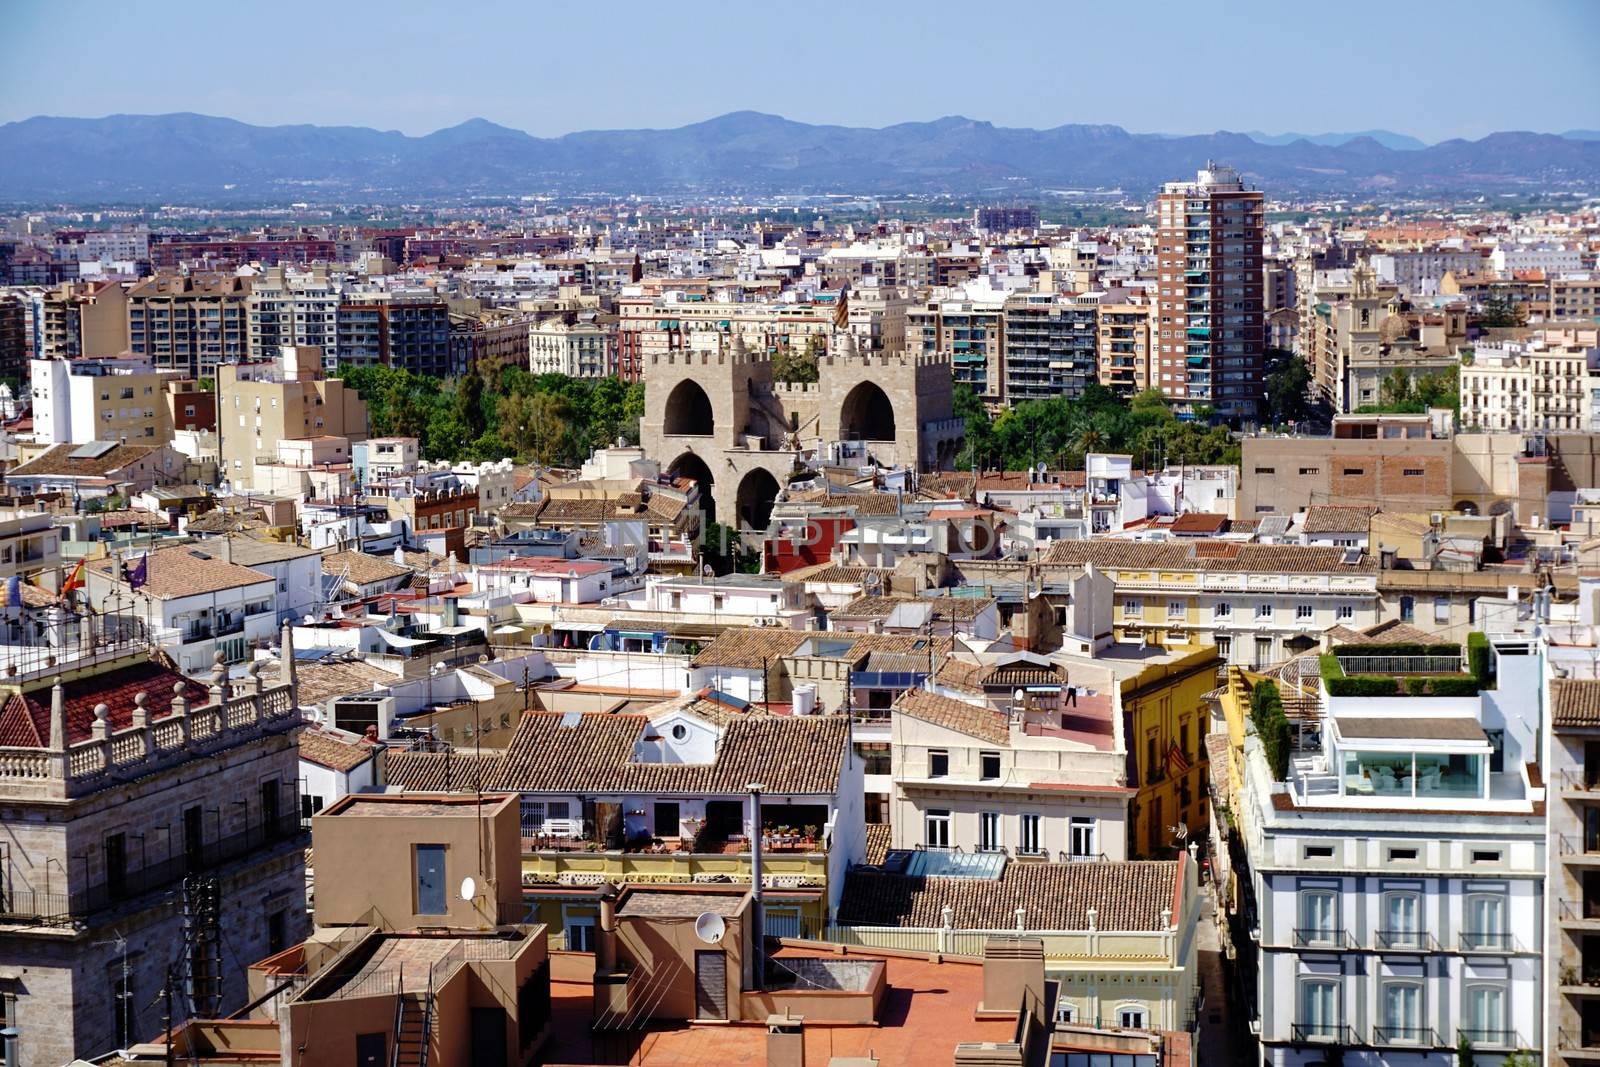 Roof top view over the city of Valencia, Spain